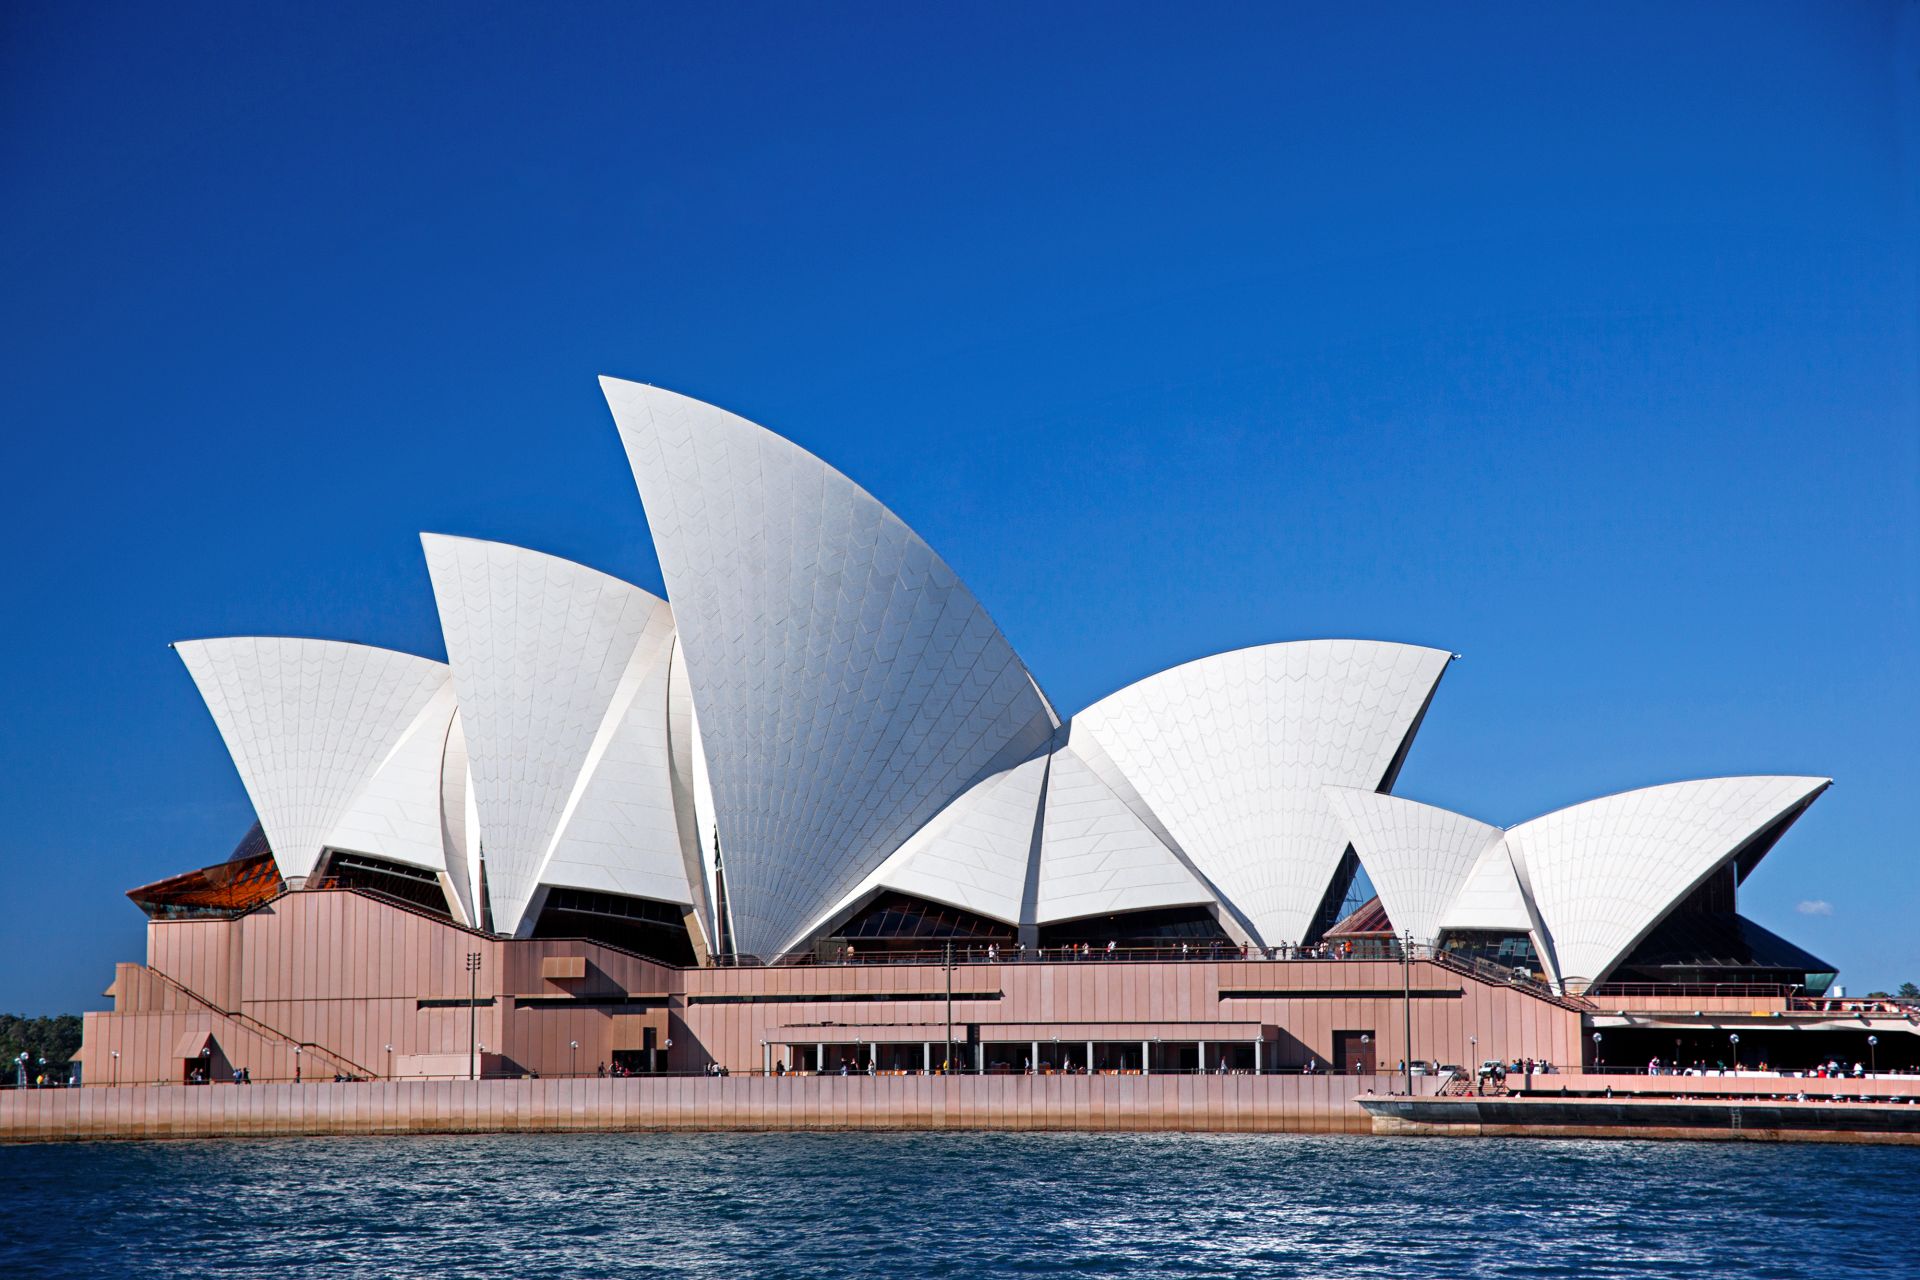 Facts About Sydney Opera House | DK Find Out